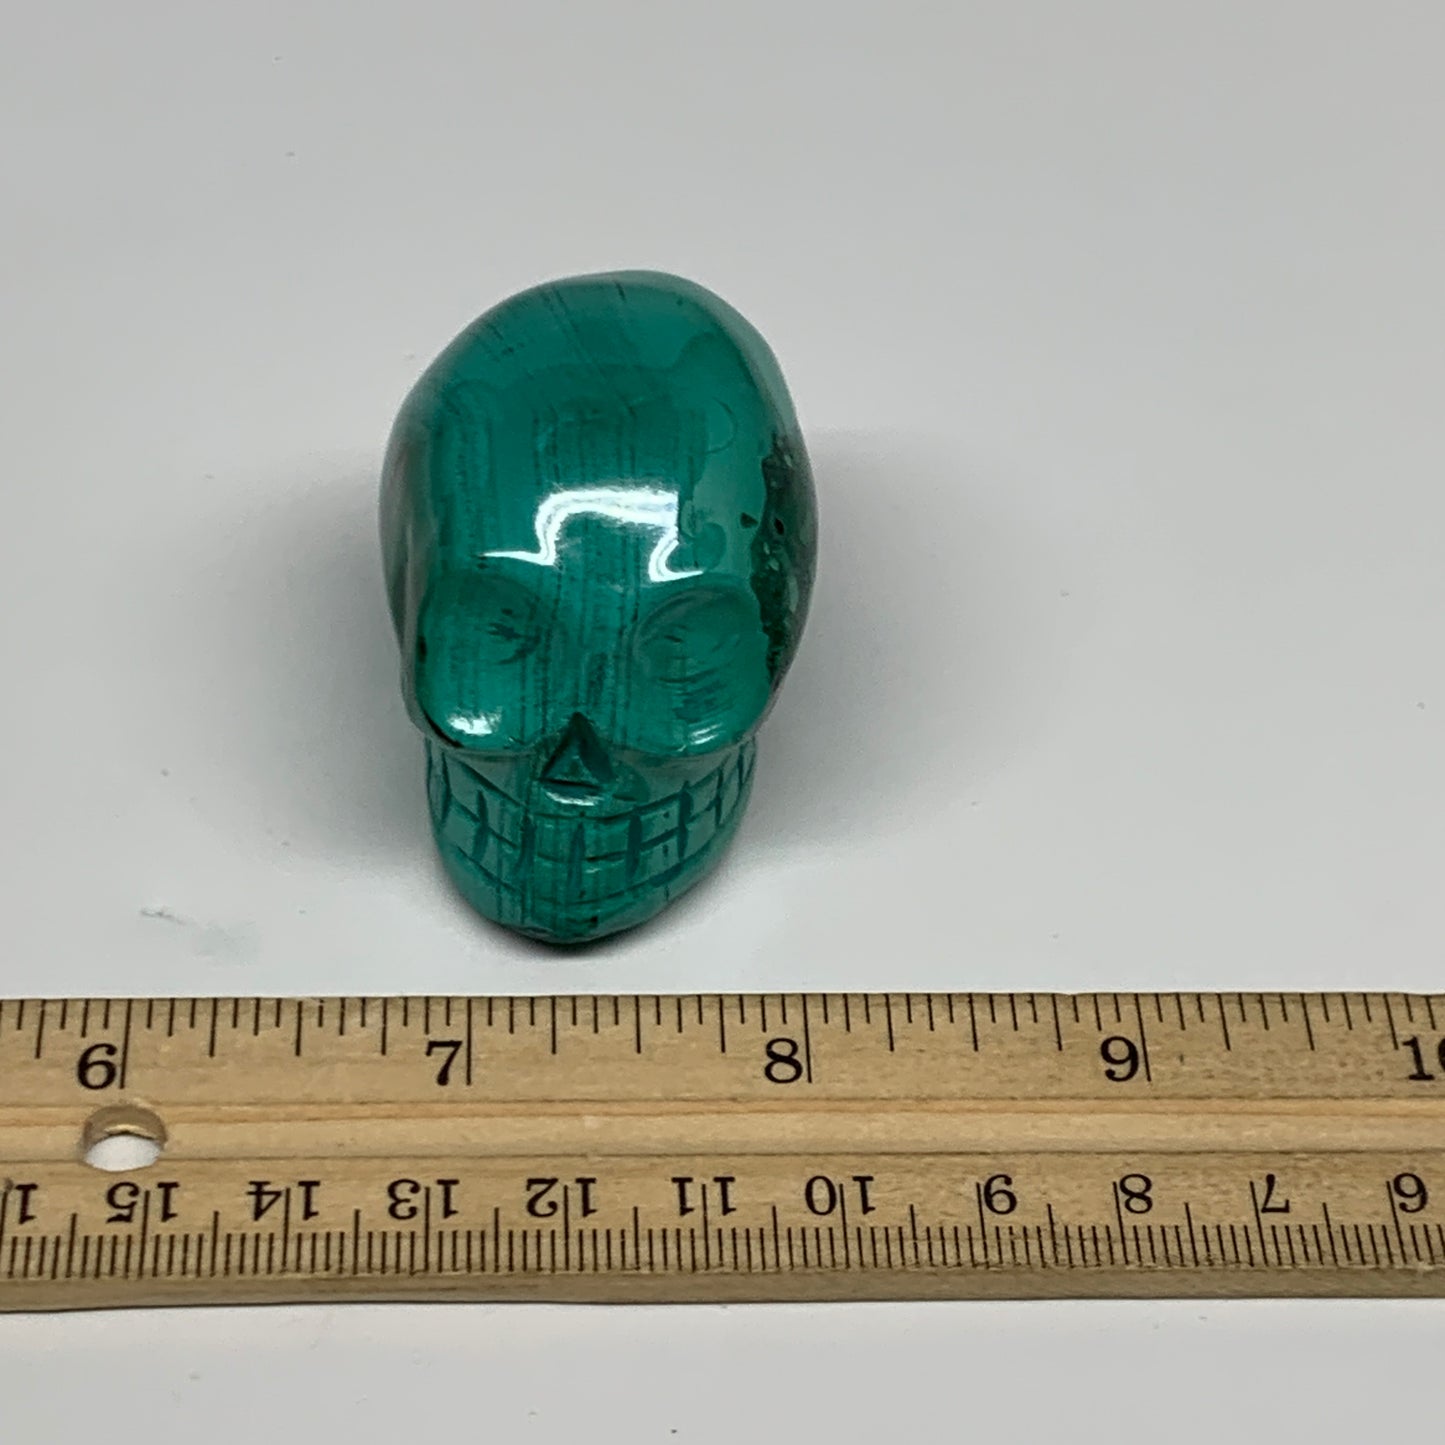 137.7g, 1.9"x1.4"x1.5", Natural Solid Malachite Skull From Congo, B32723